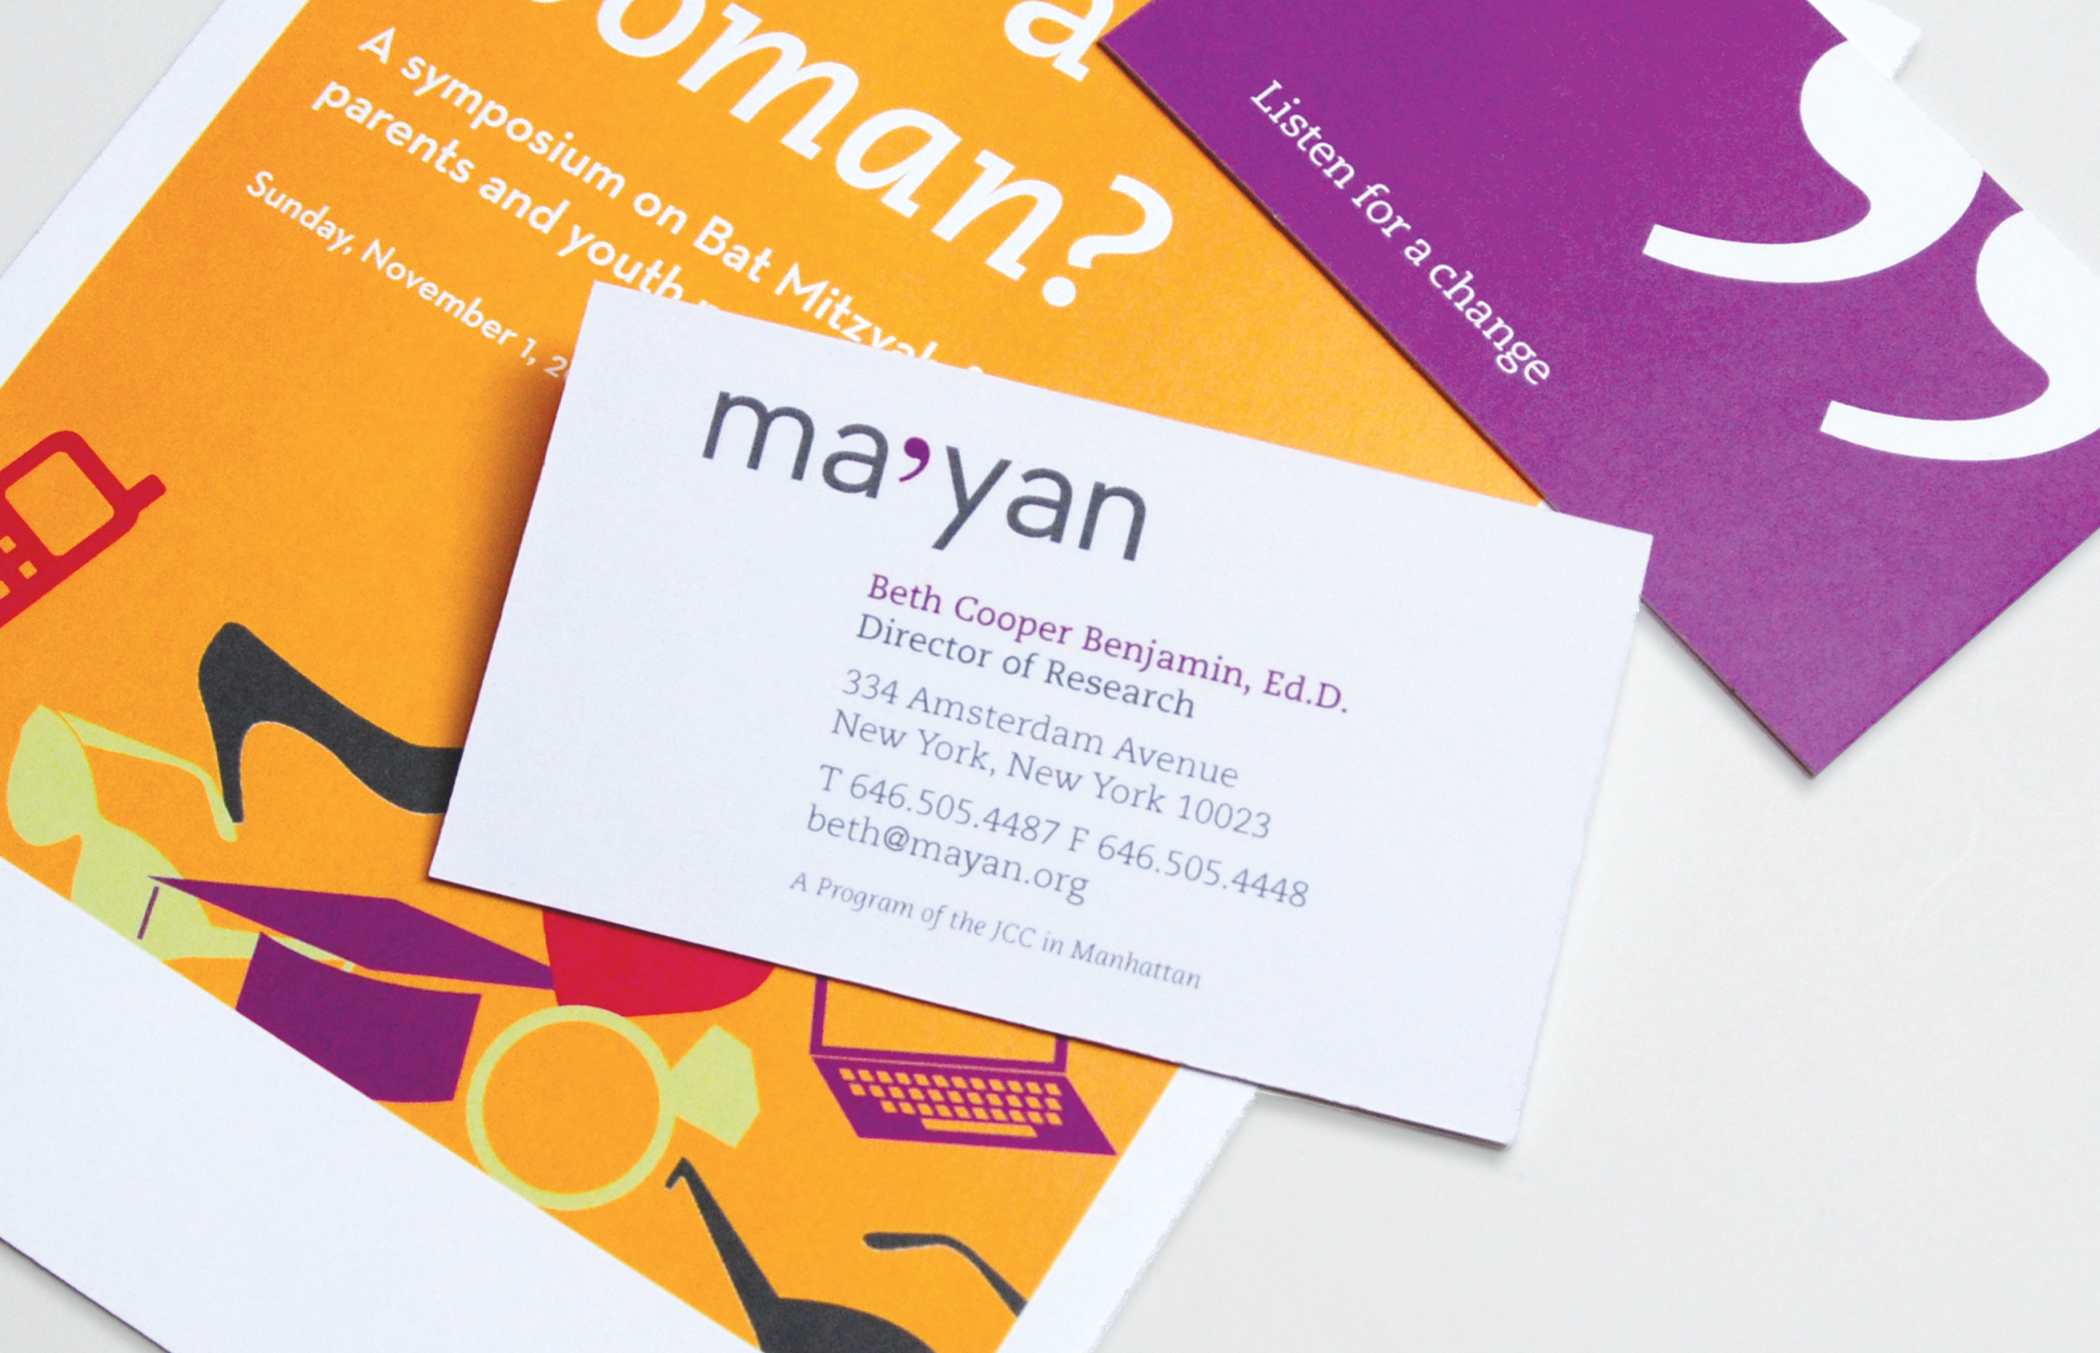 The front of Ma'yan business card on top of colorful orange and purple paper informational materials.